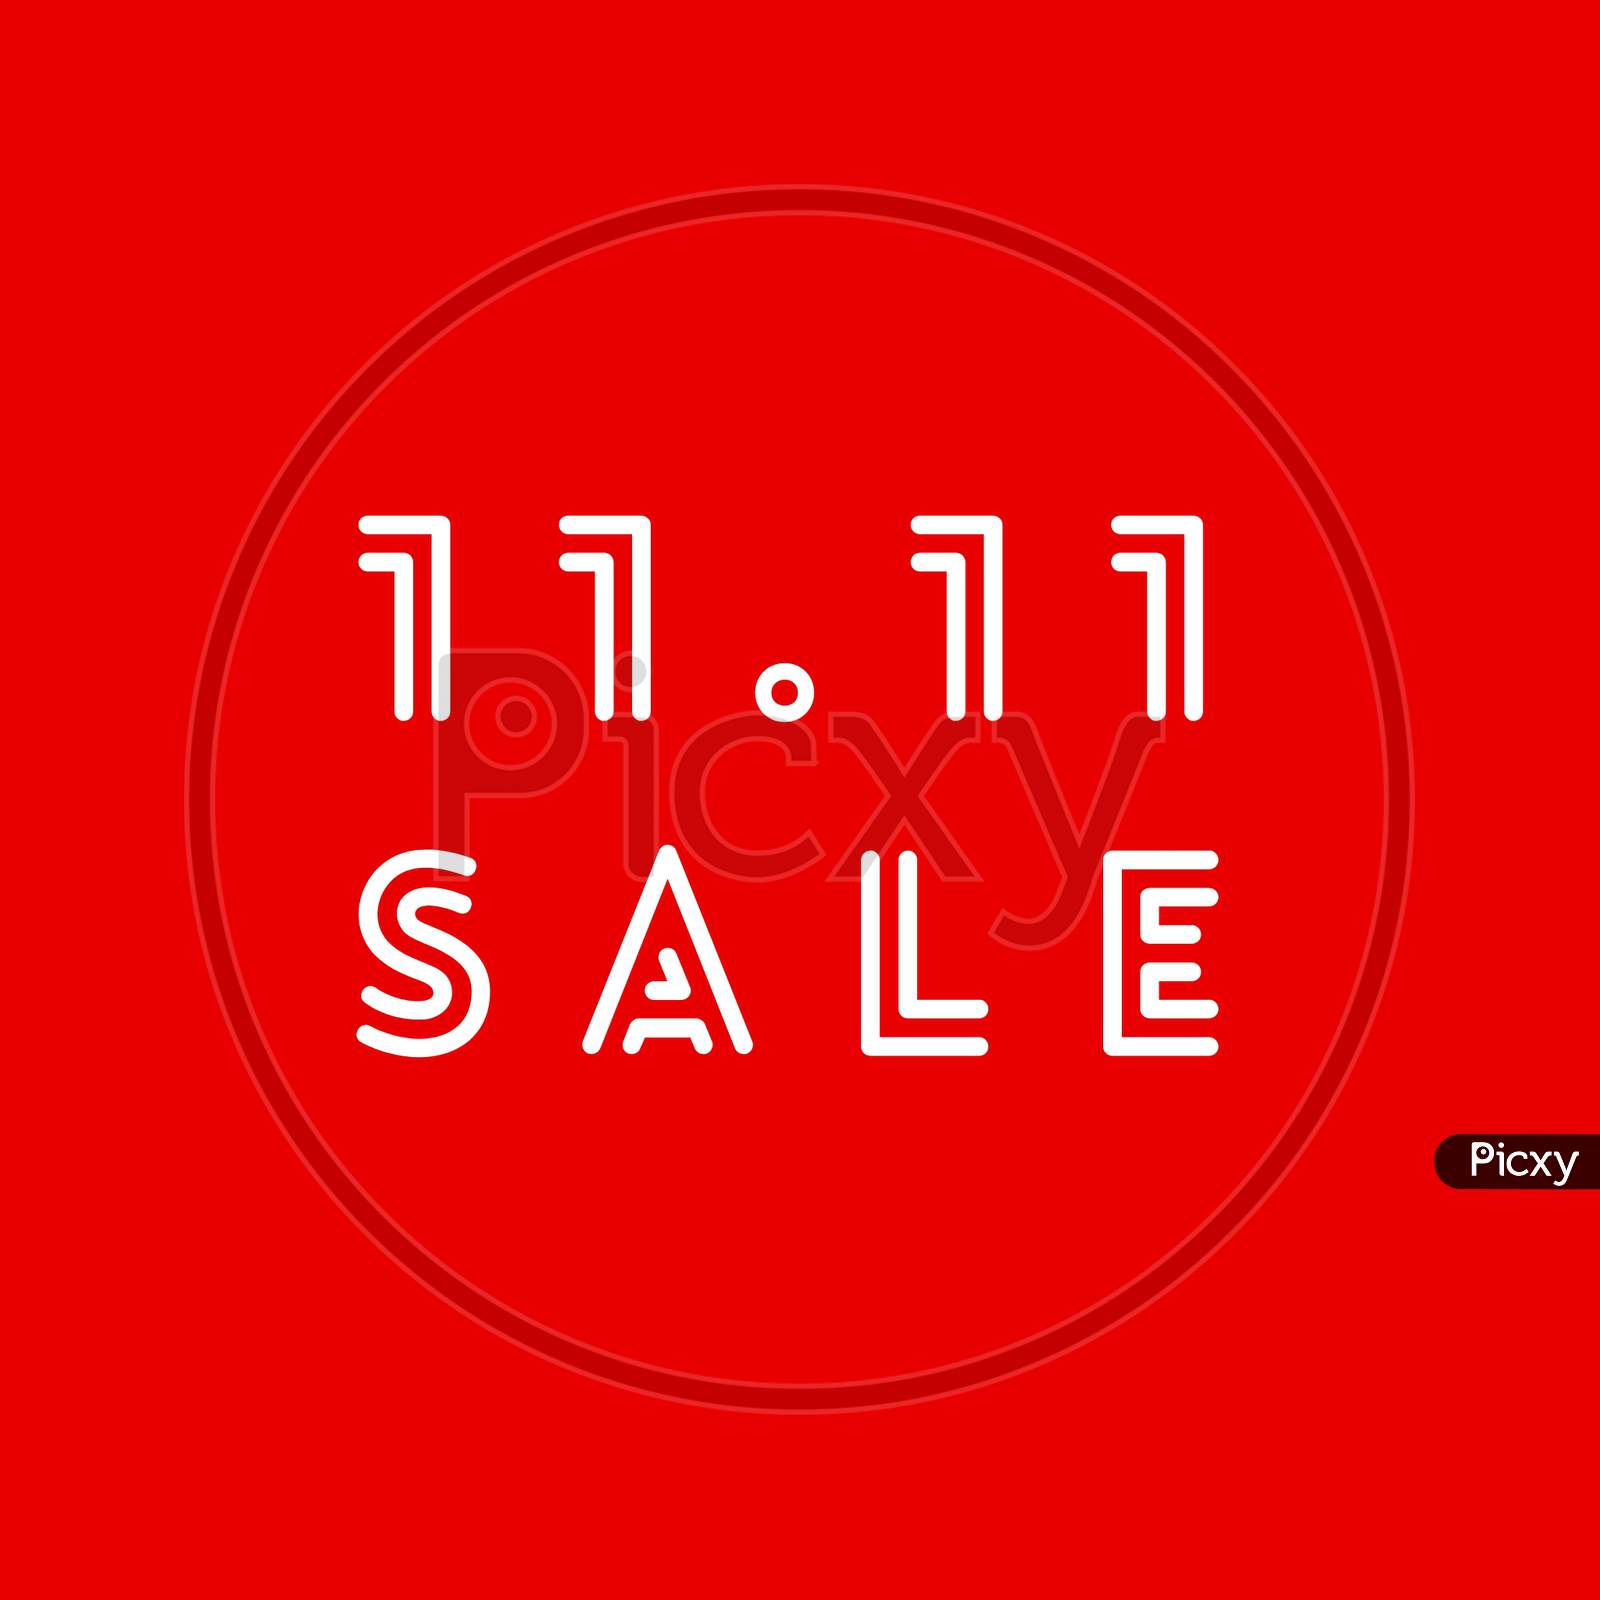 Image With Text "11.11 Sale"